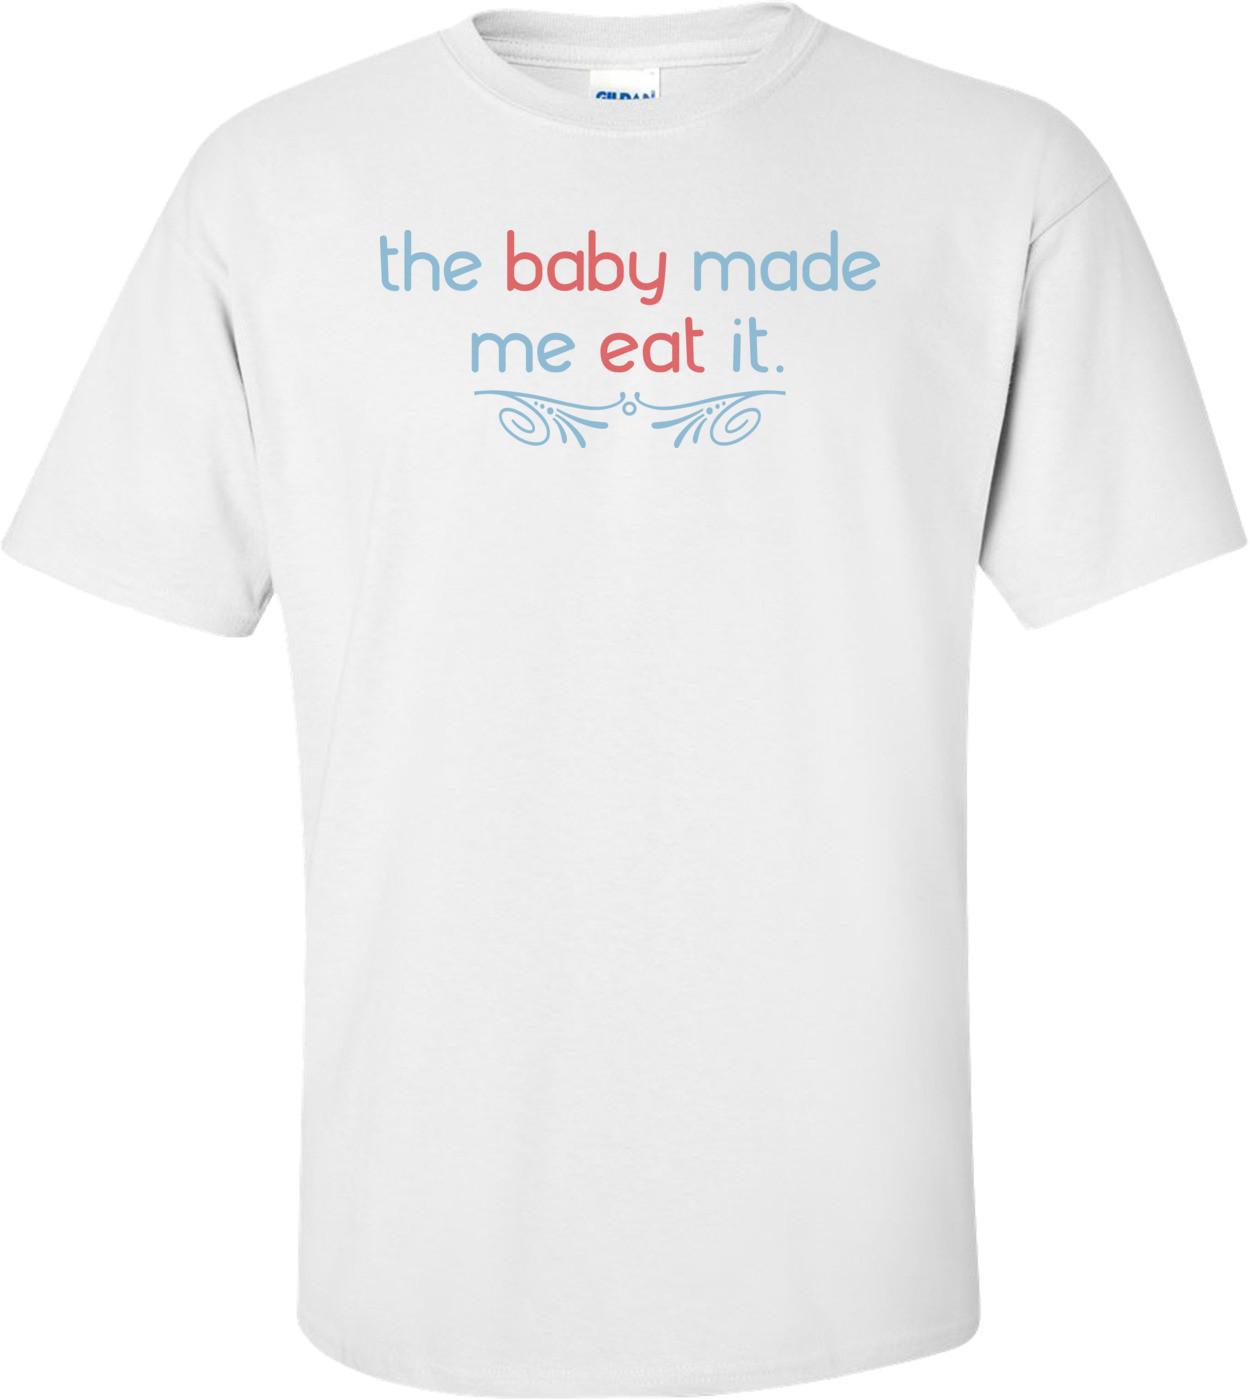 The Baby Made Me Eat It. Funny Pregnancy Shirt